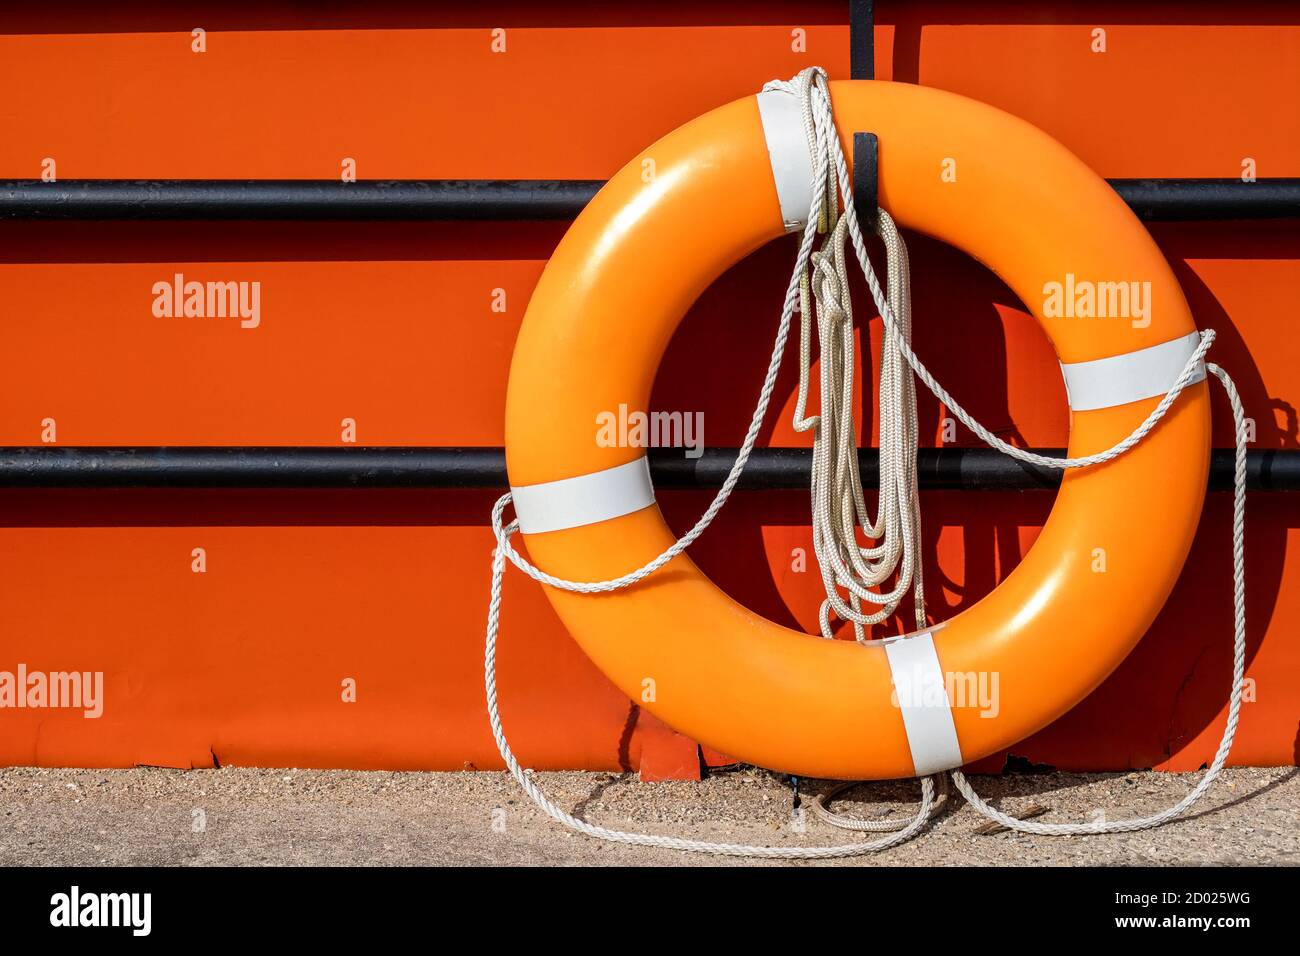 An orange life ring hangs on a hook on a black fence in front of an orange background surface. The life preserver has white ropes attached. Stock Photo